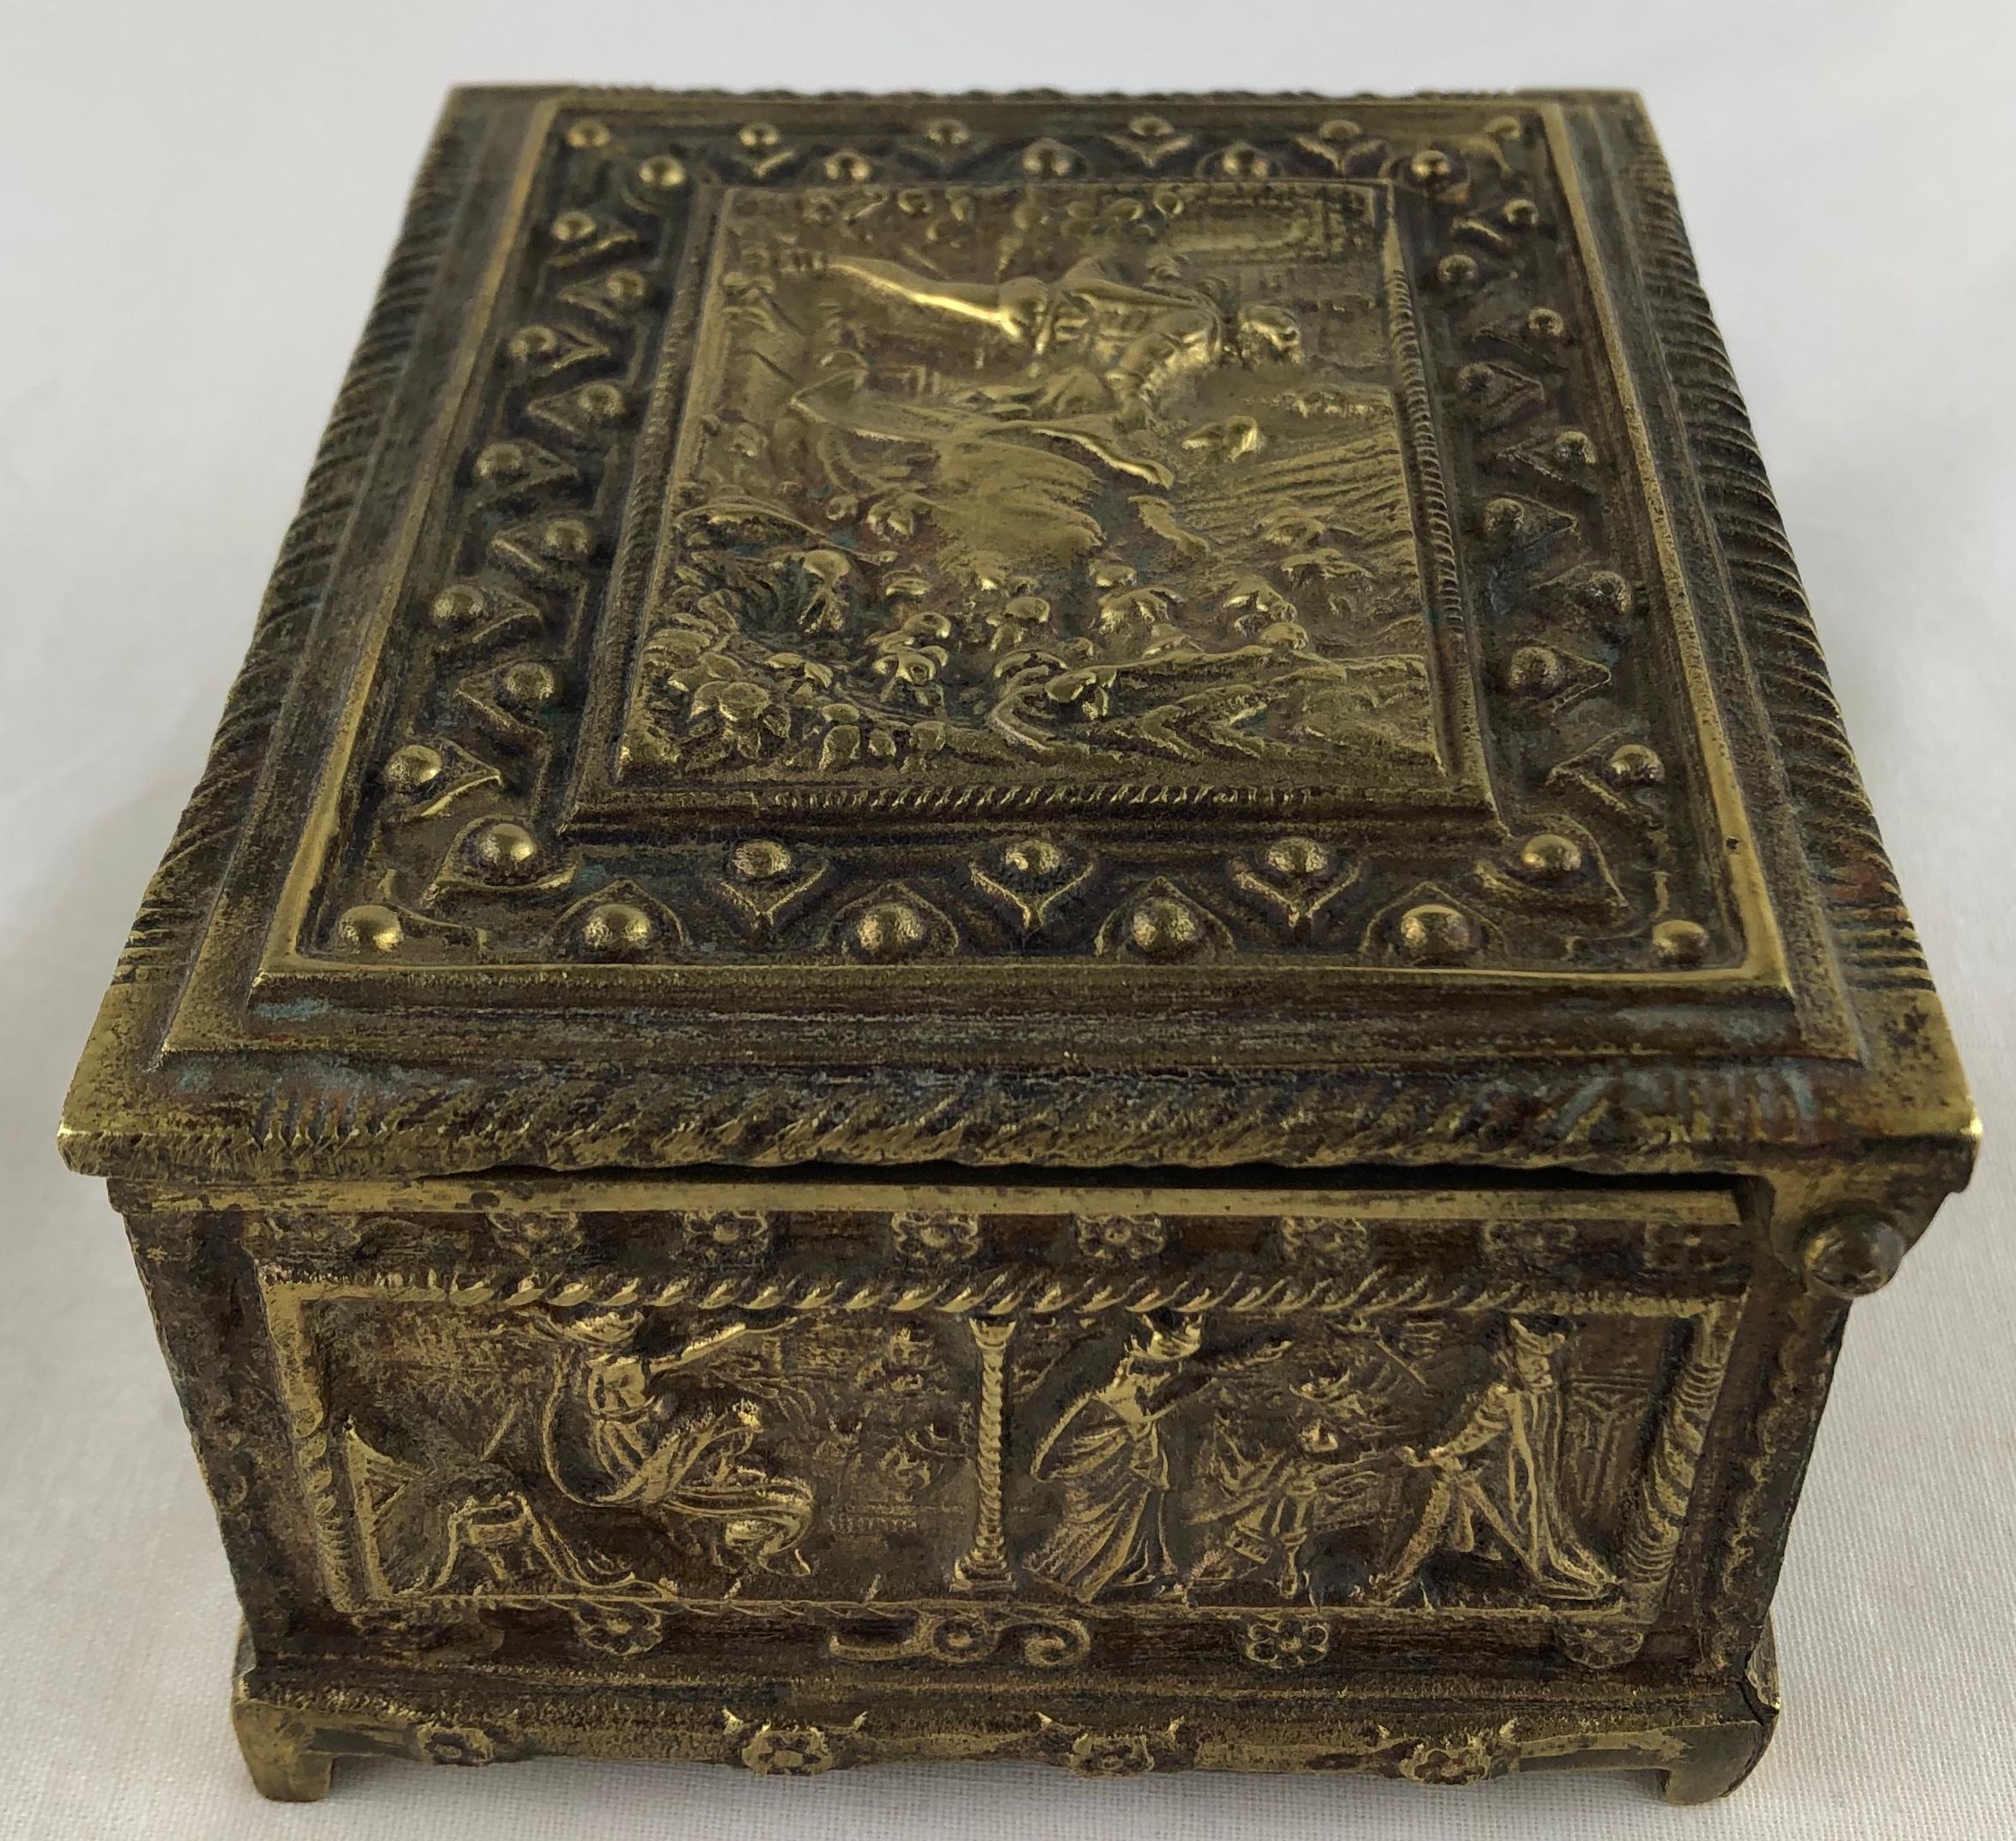 19th Century French Bronze Jewelry Box with High Reliefs, circa 1880